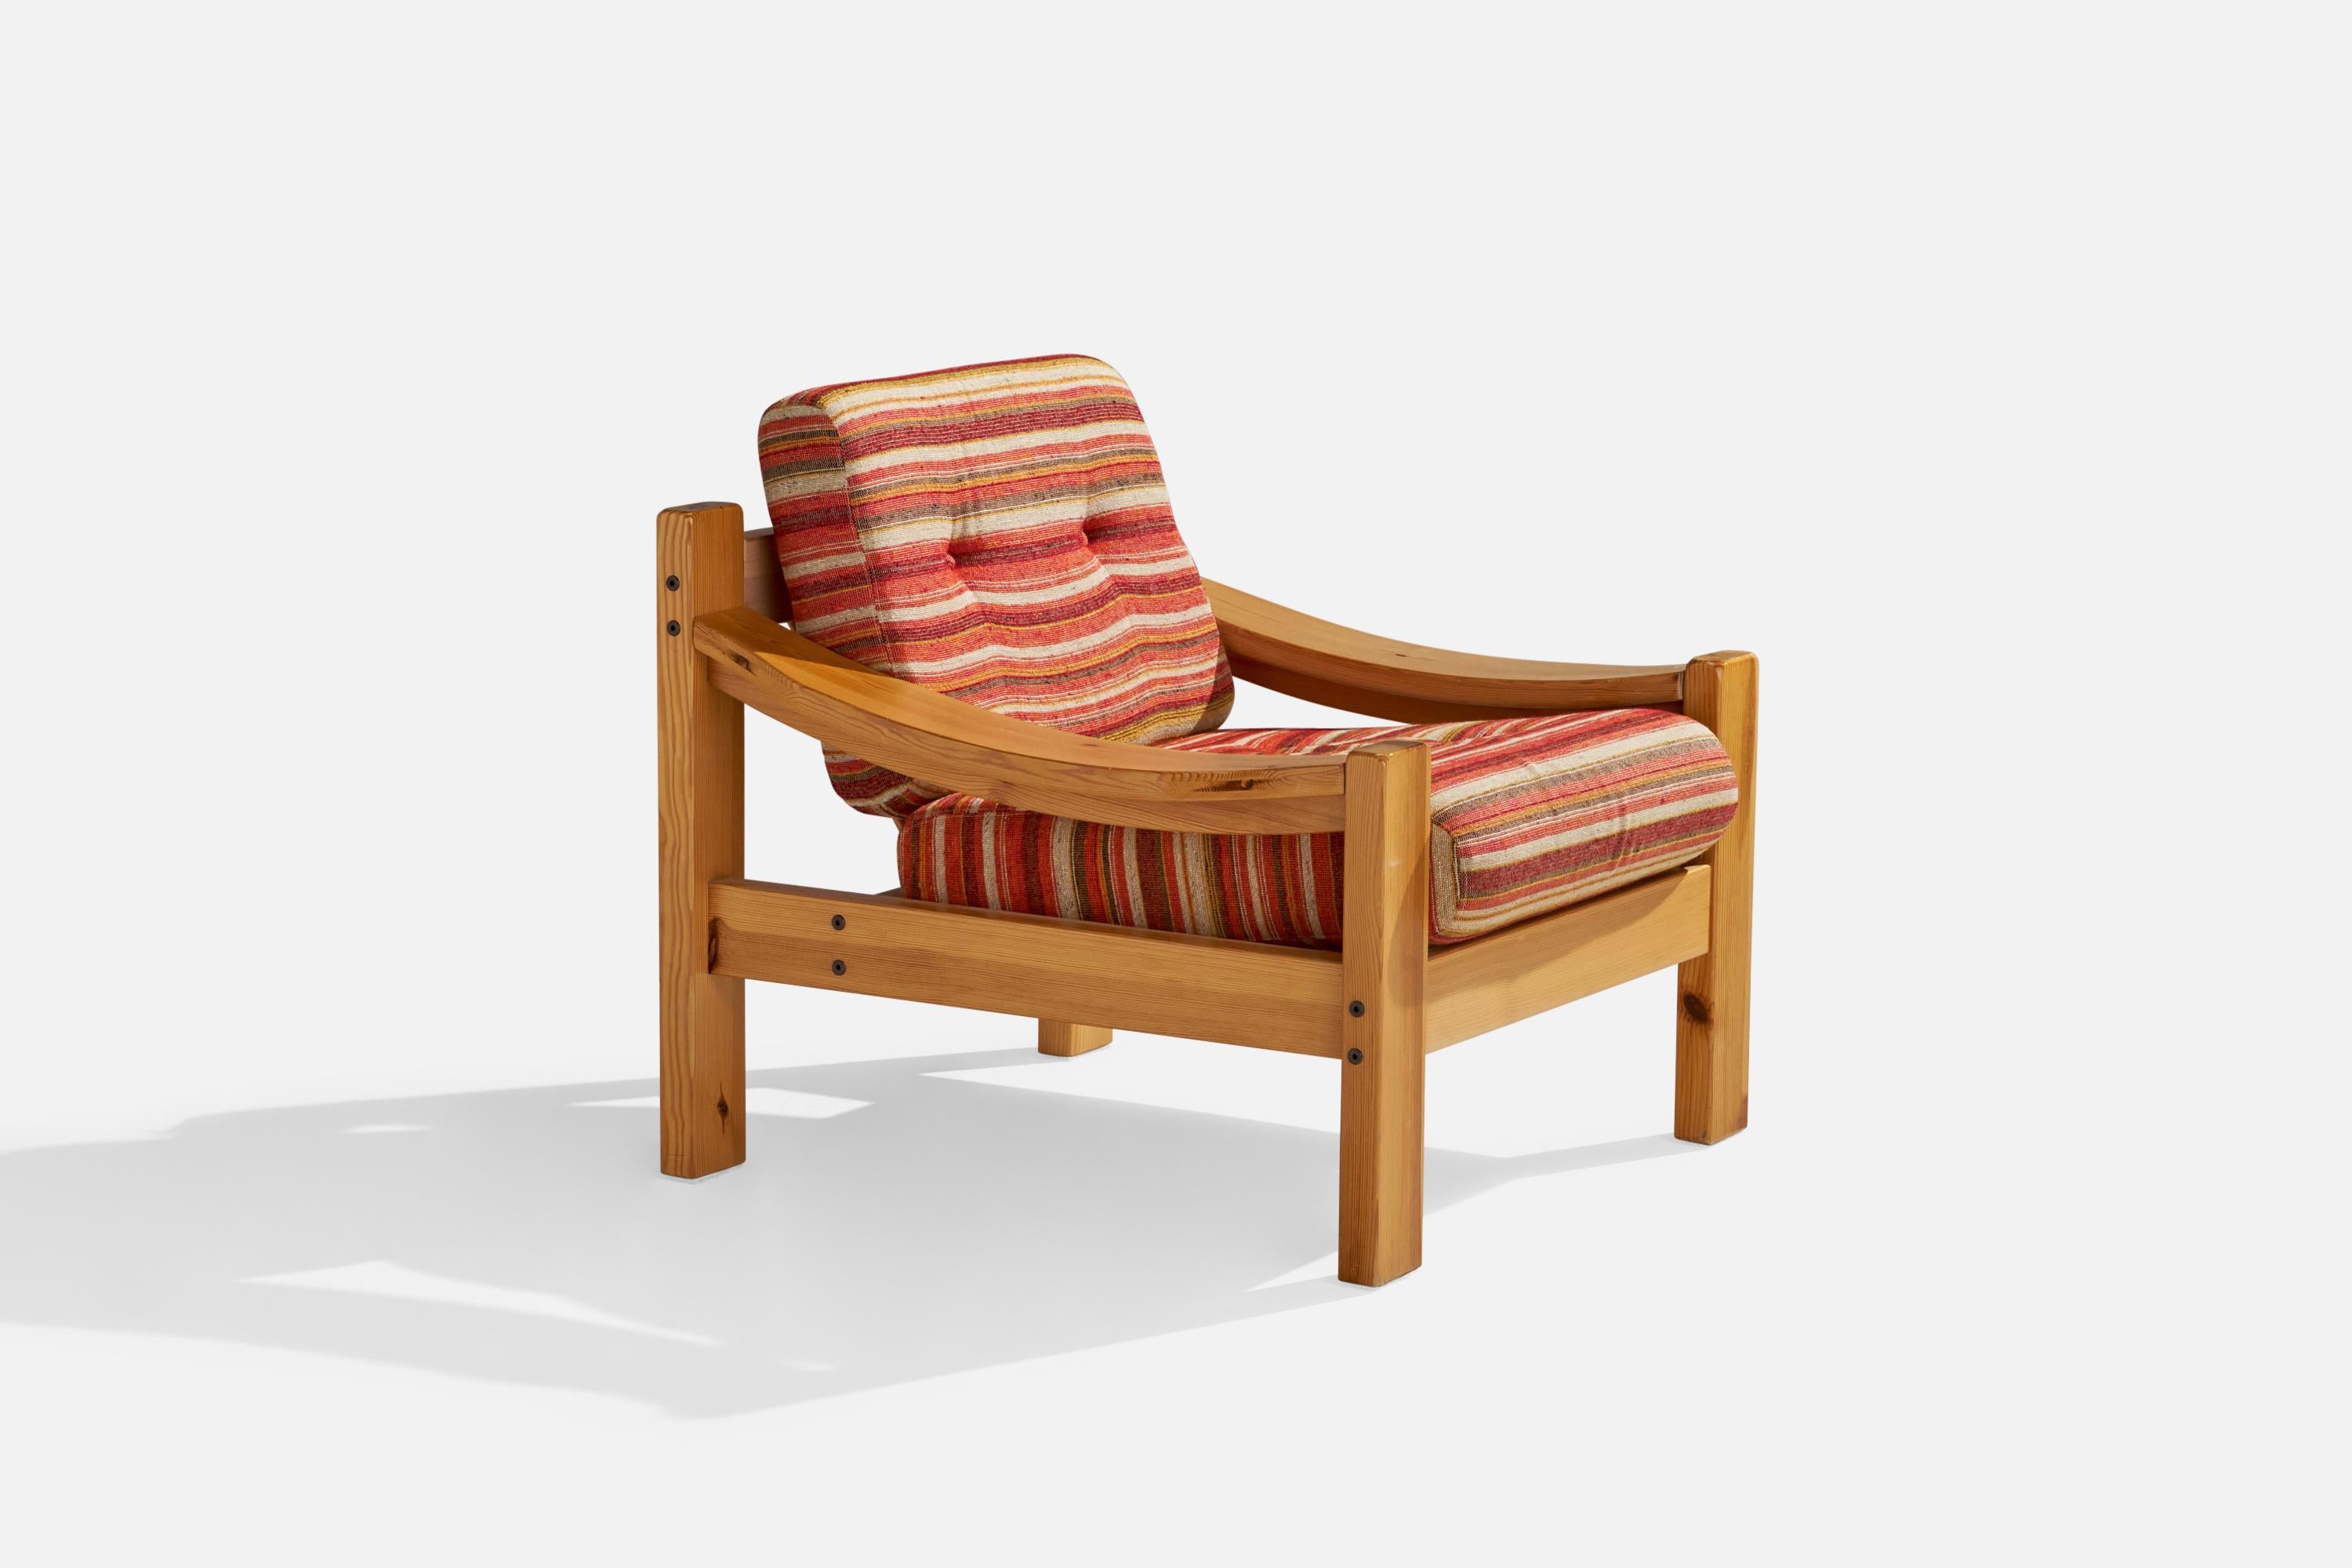 A pine and red fabric lounge chair designed and produced in Sweden, 1970s.

seat height 17.33”.